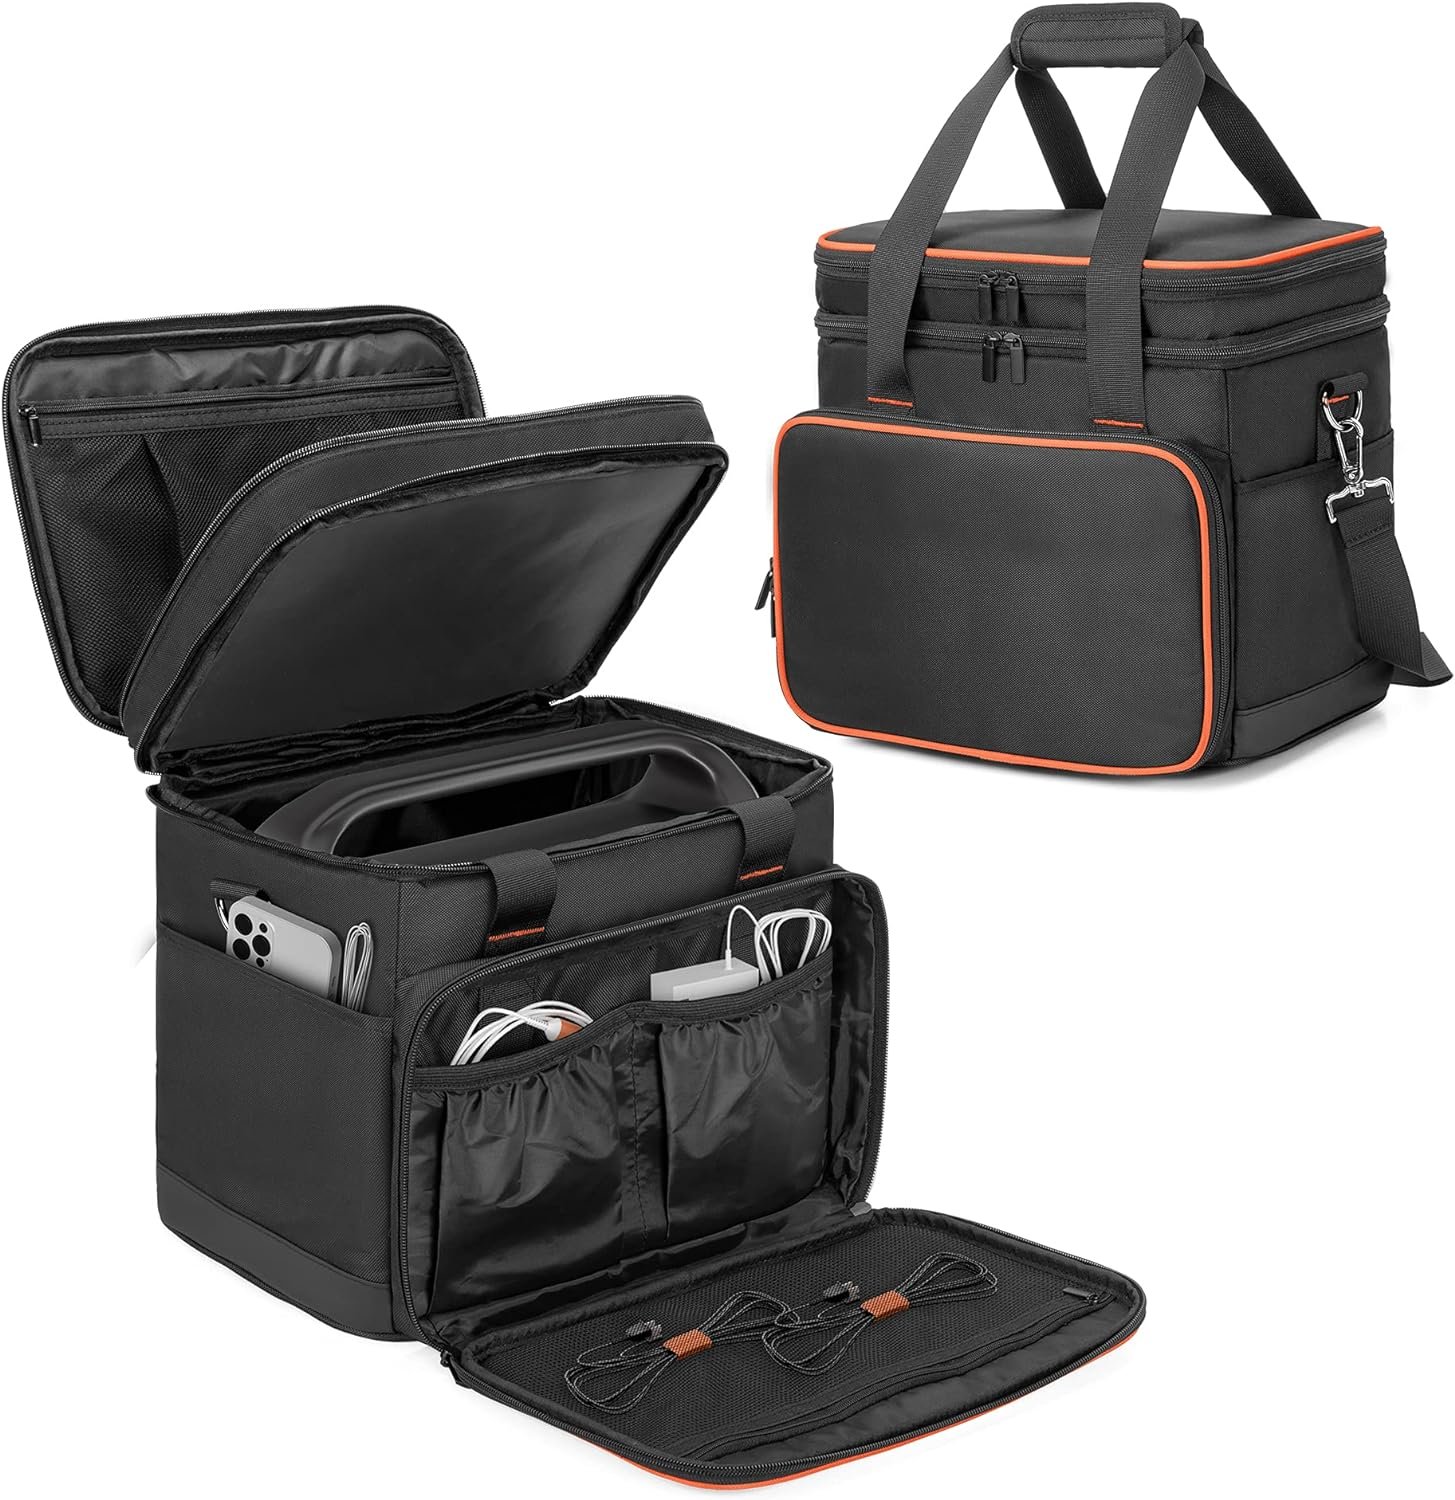 Trunab Double-Layer Carrying Case Review